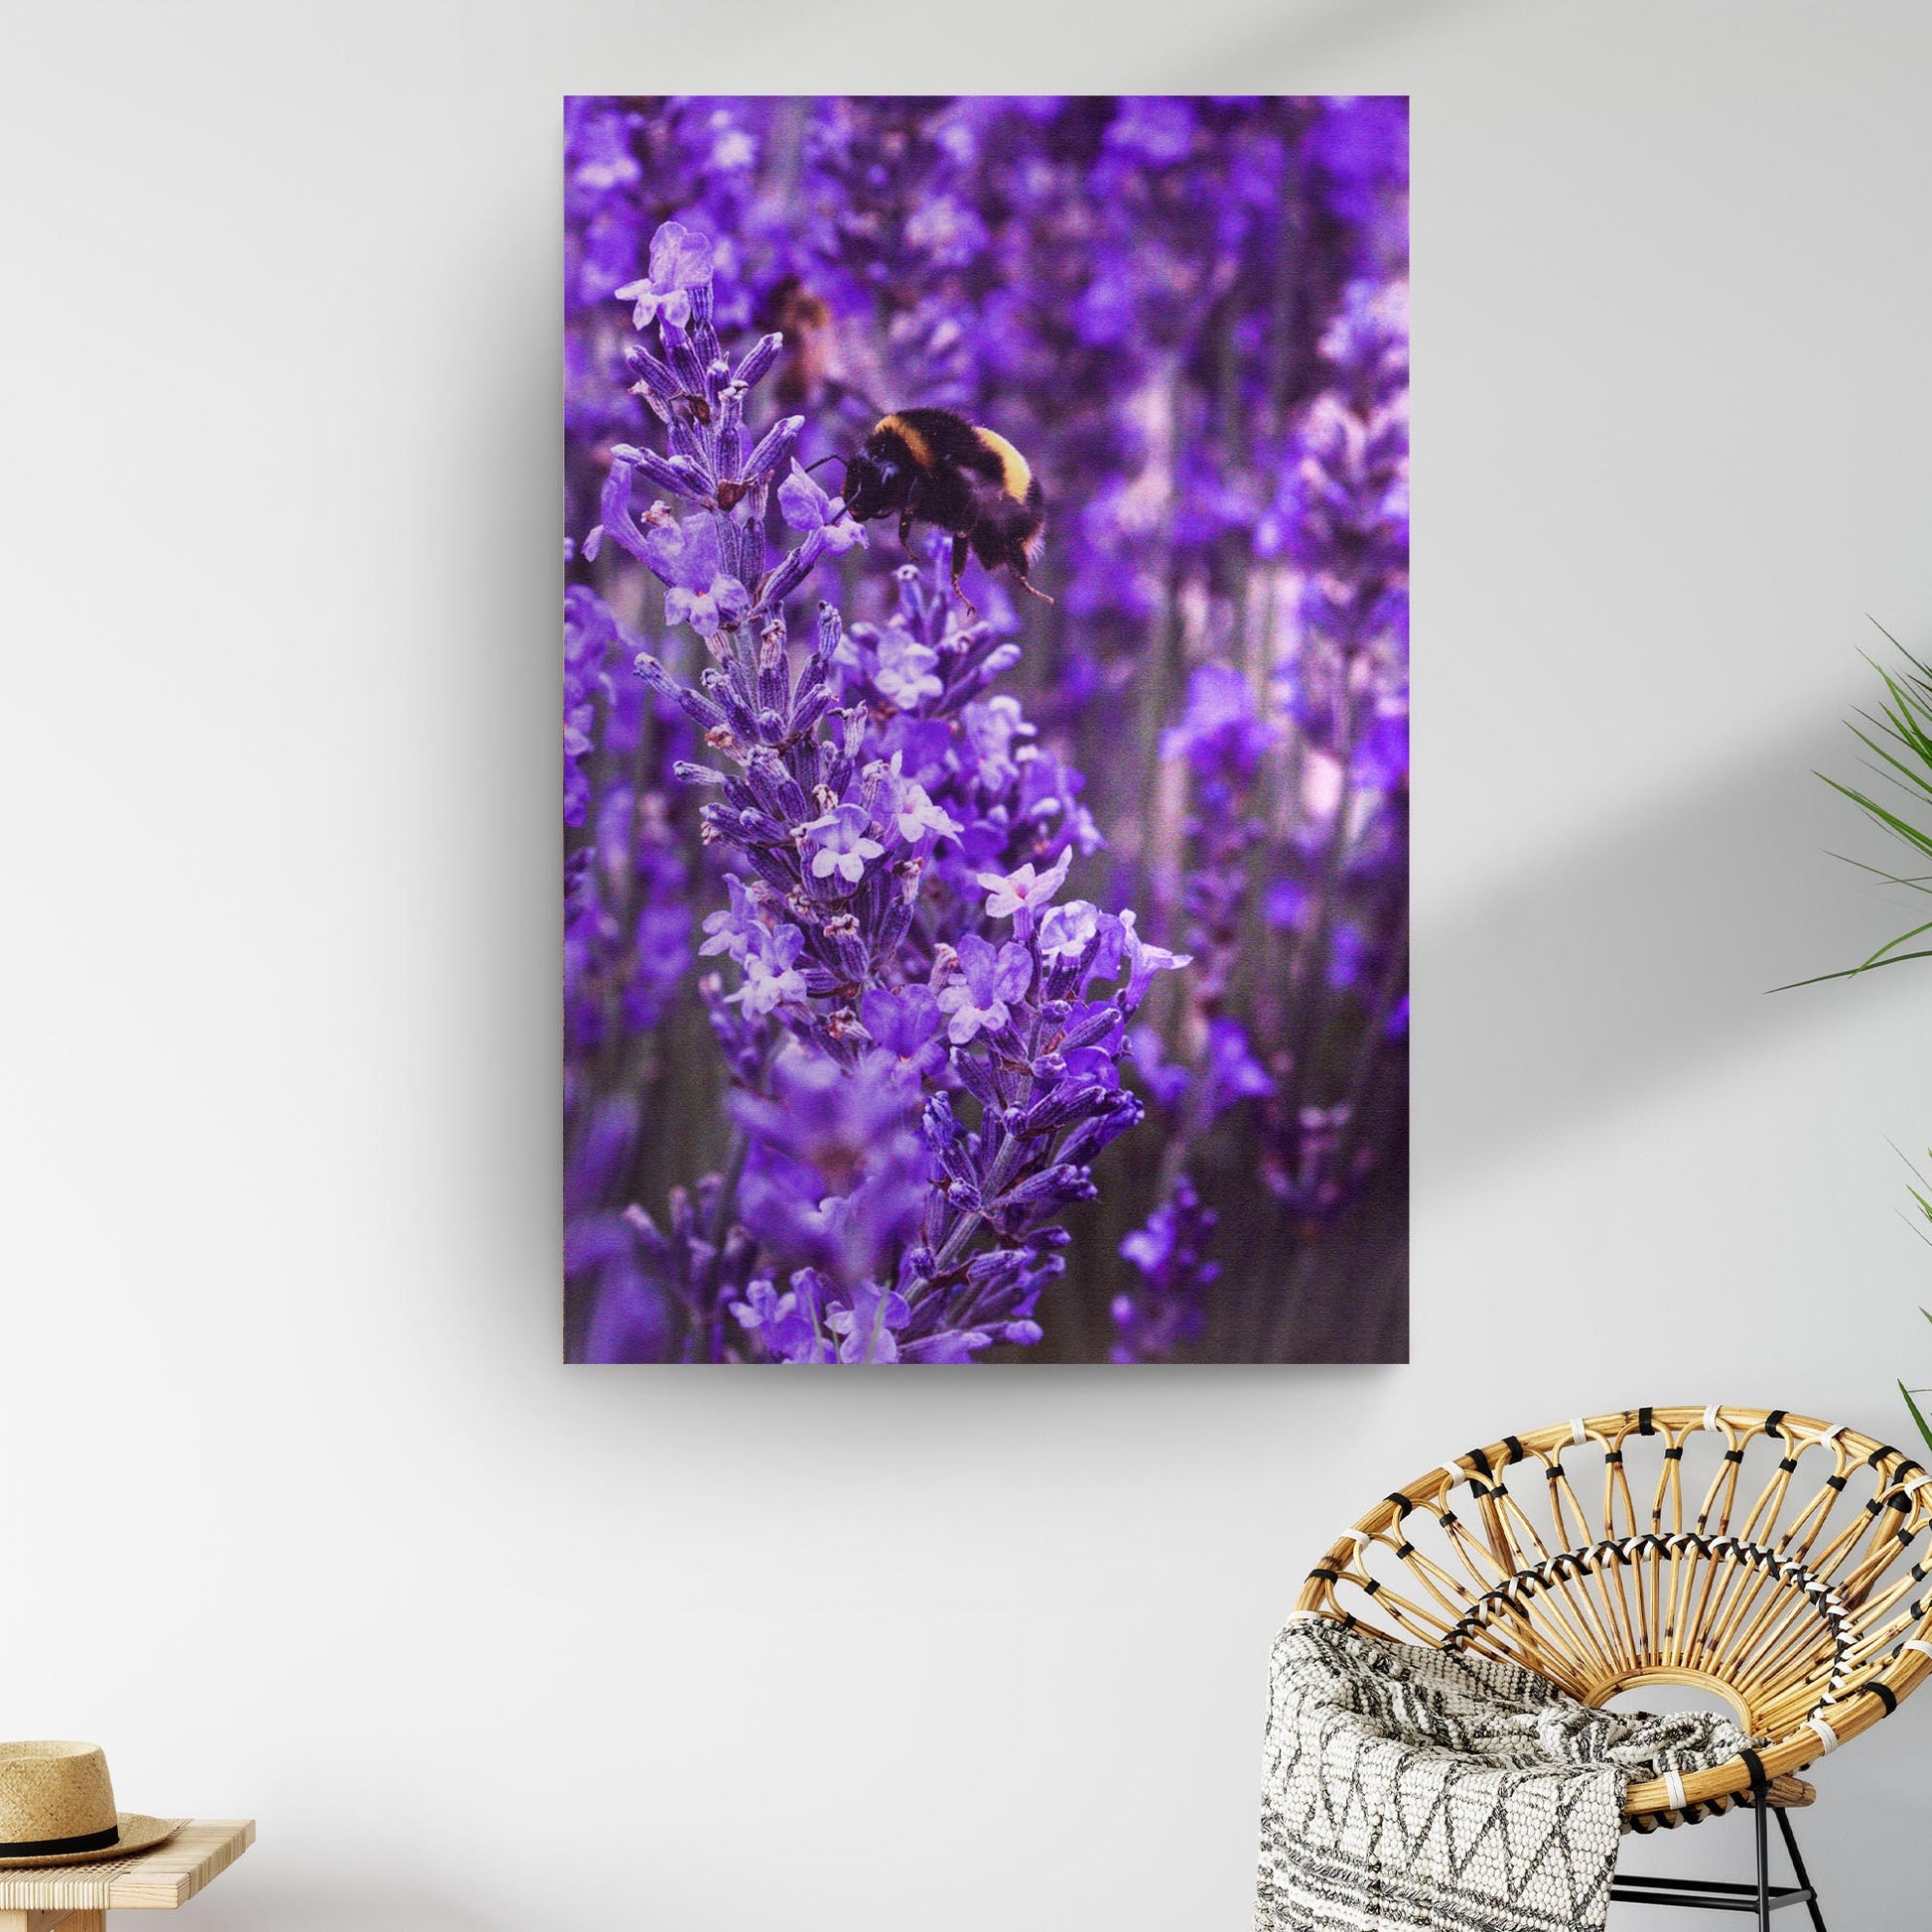 Bee Among Lavender Fields Canvas Wall Art - Image by Tailored Canvases